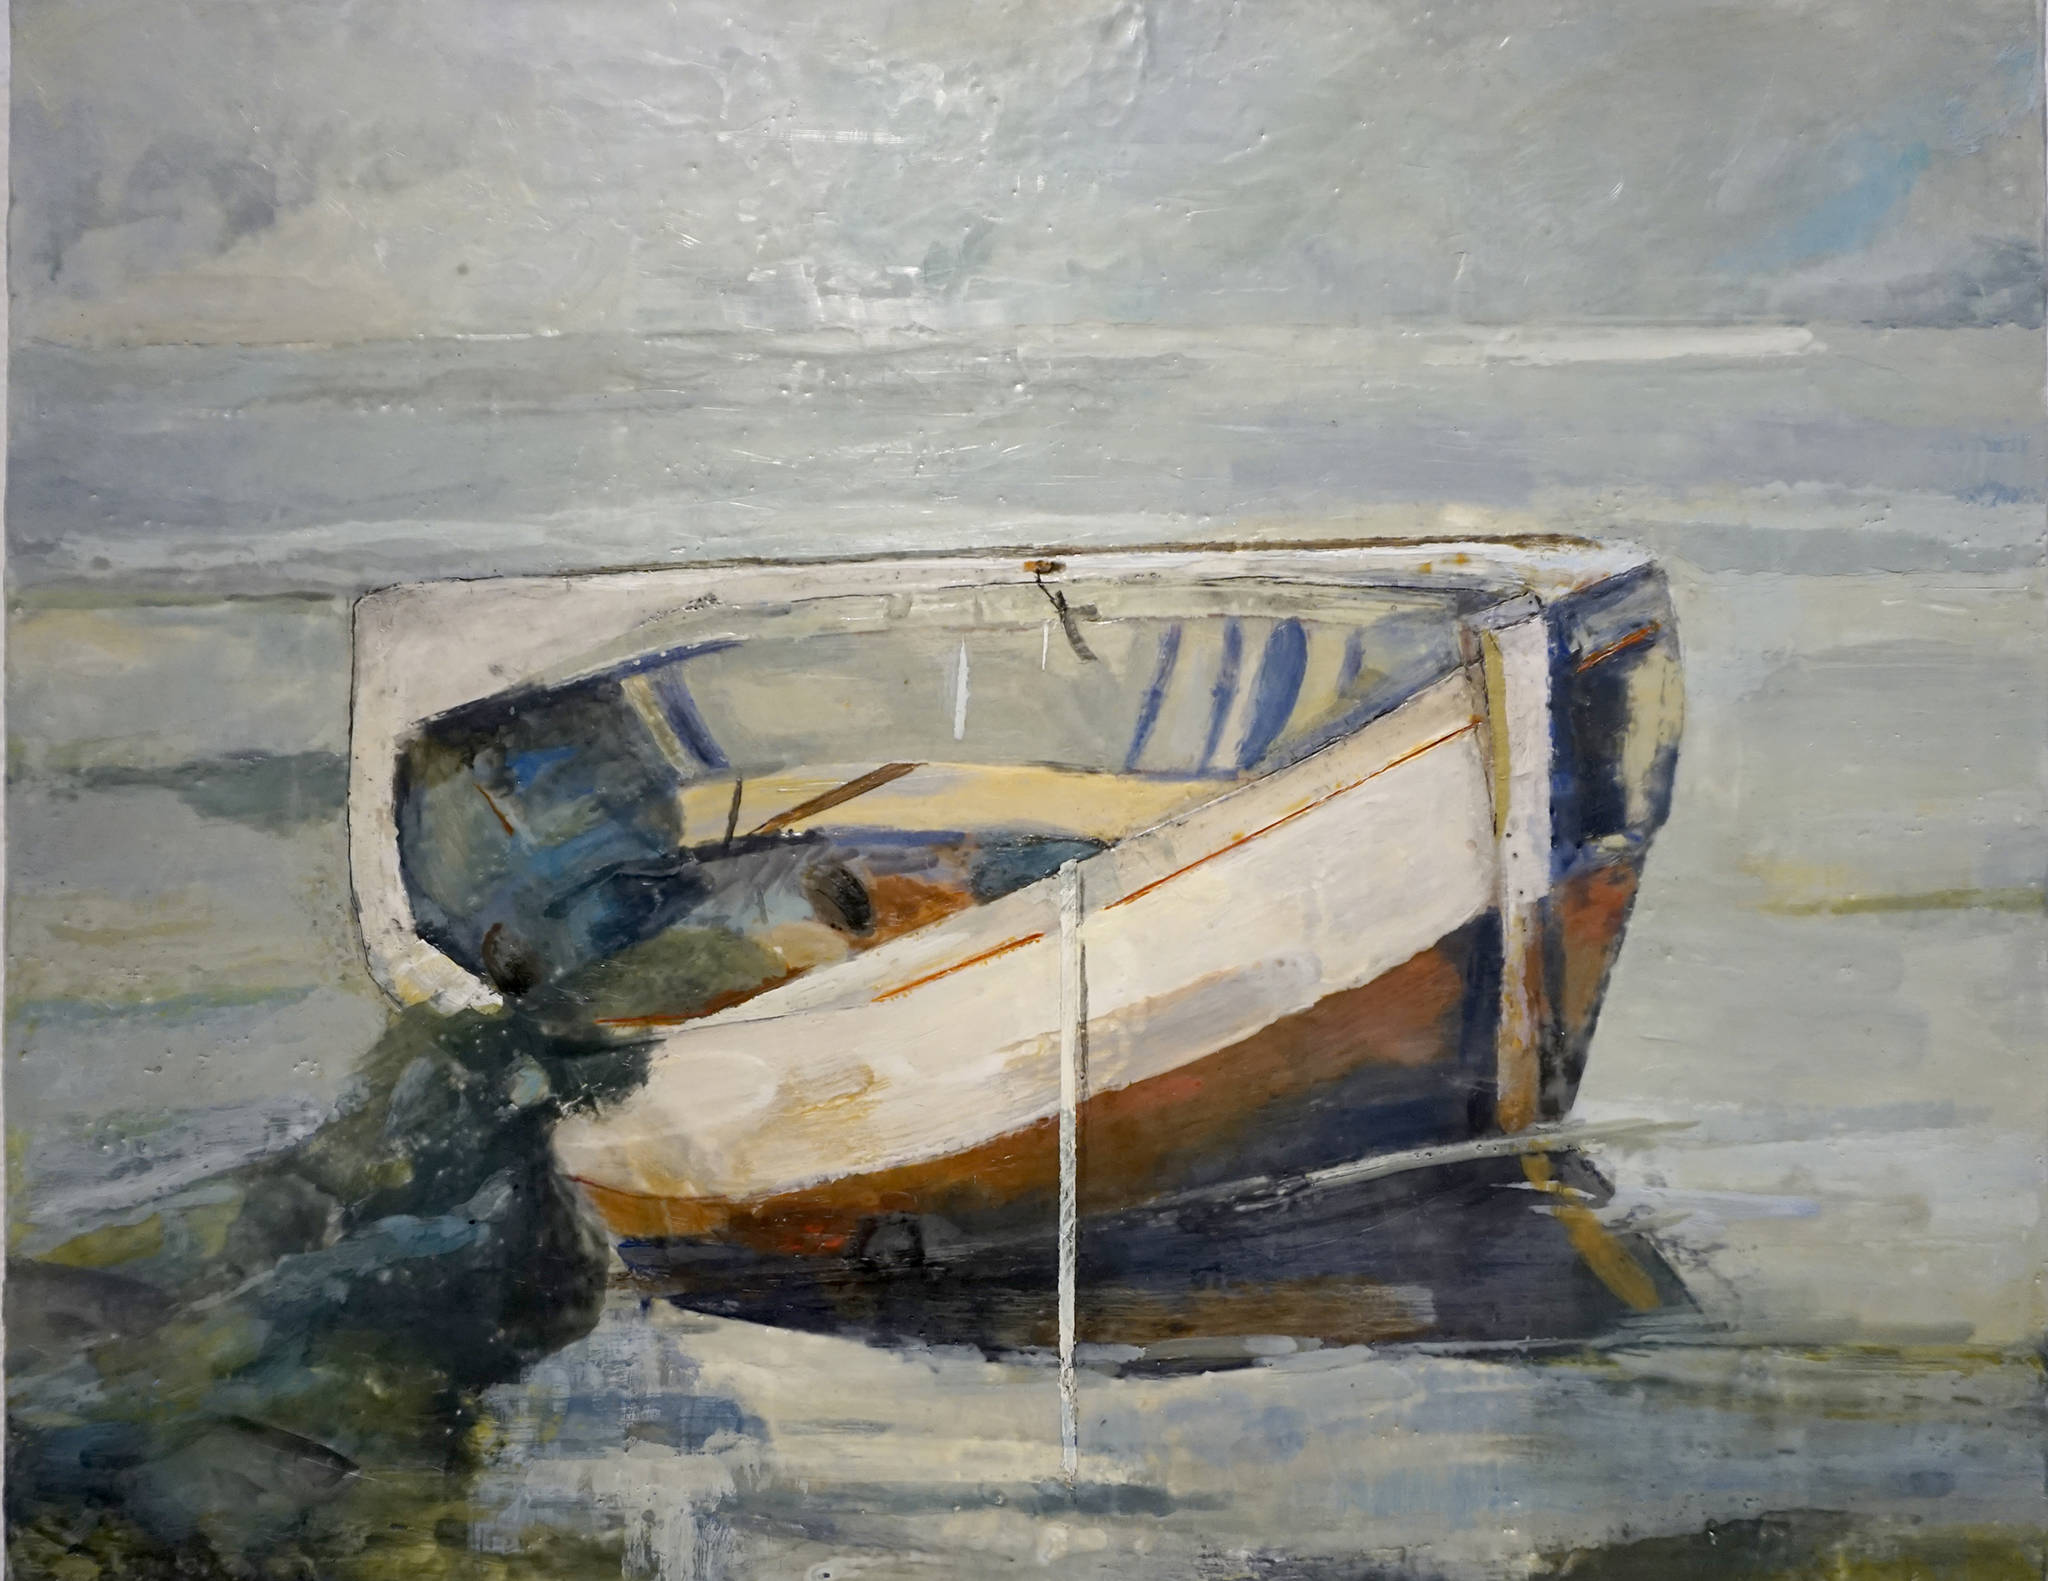 Antoinette Walker ‘s “Beached” is one of the encaustic paintings in her July 2019 show at Bunnell Street Arts Center in Homer, Alaska. (Photo by Michael Armstrong/Homer News)